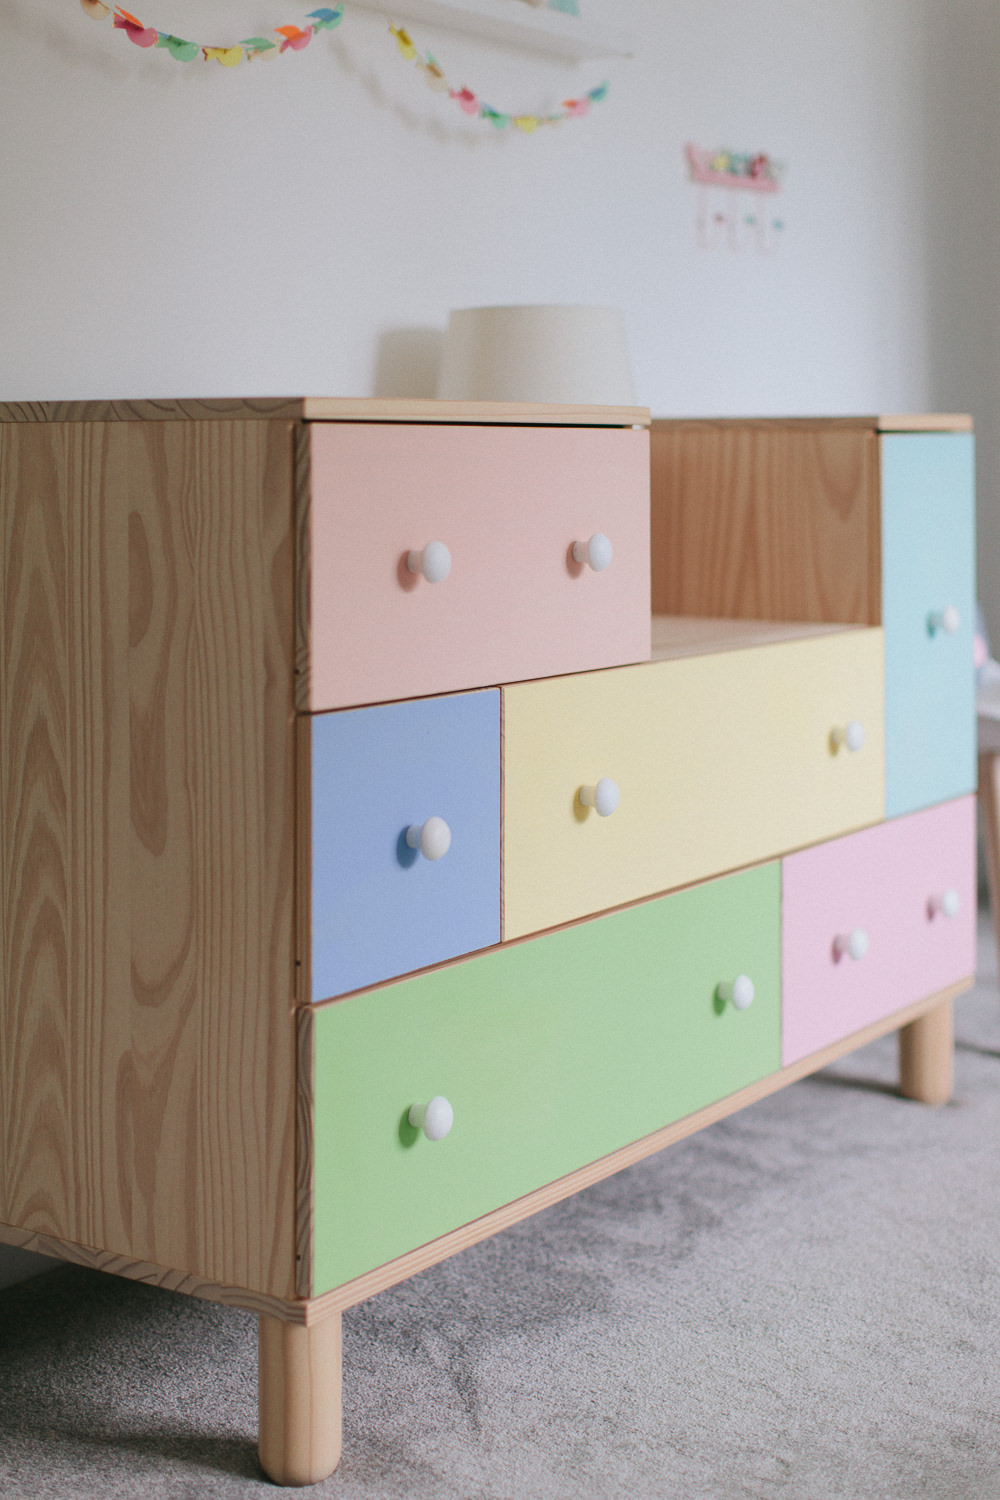 Ikea PS 2012 Chest of Drawers Hack